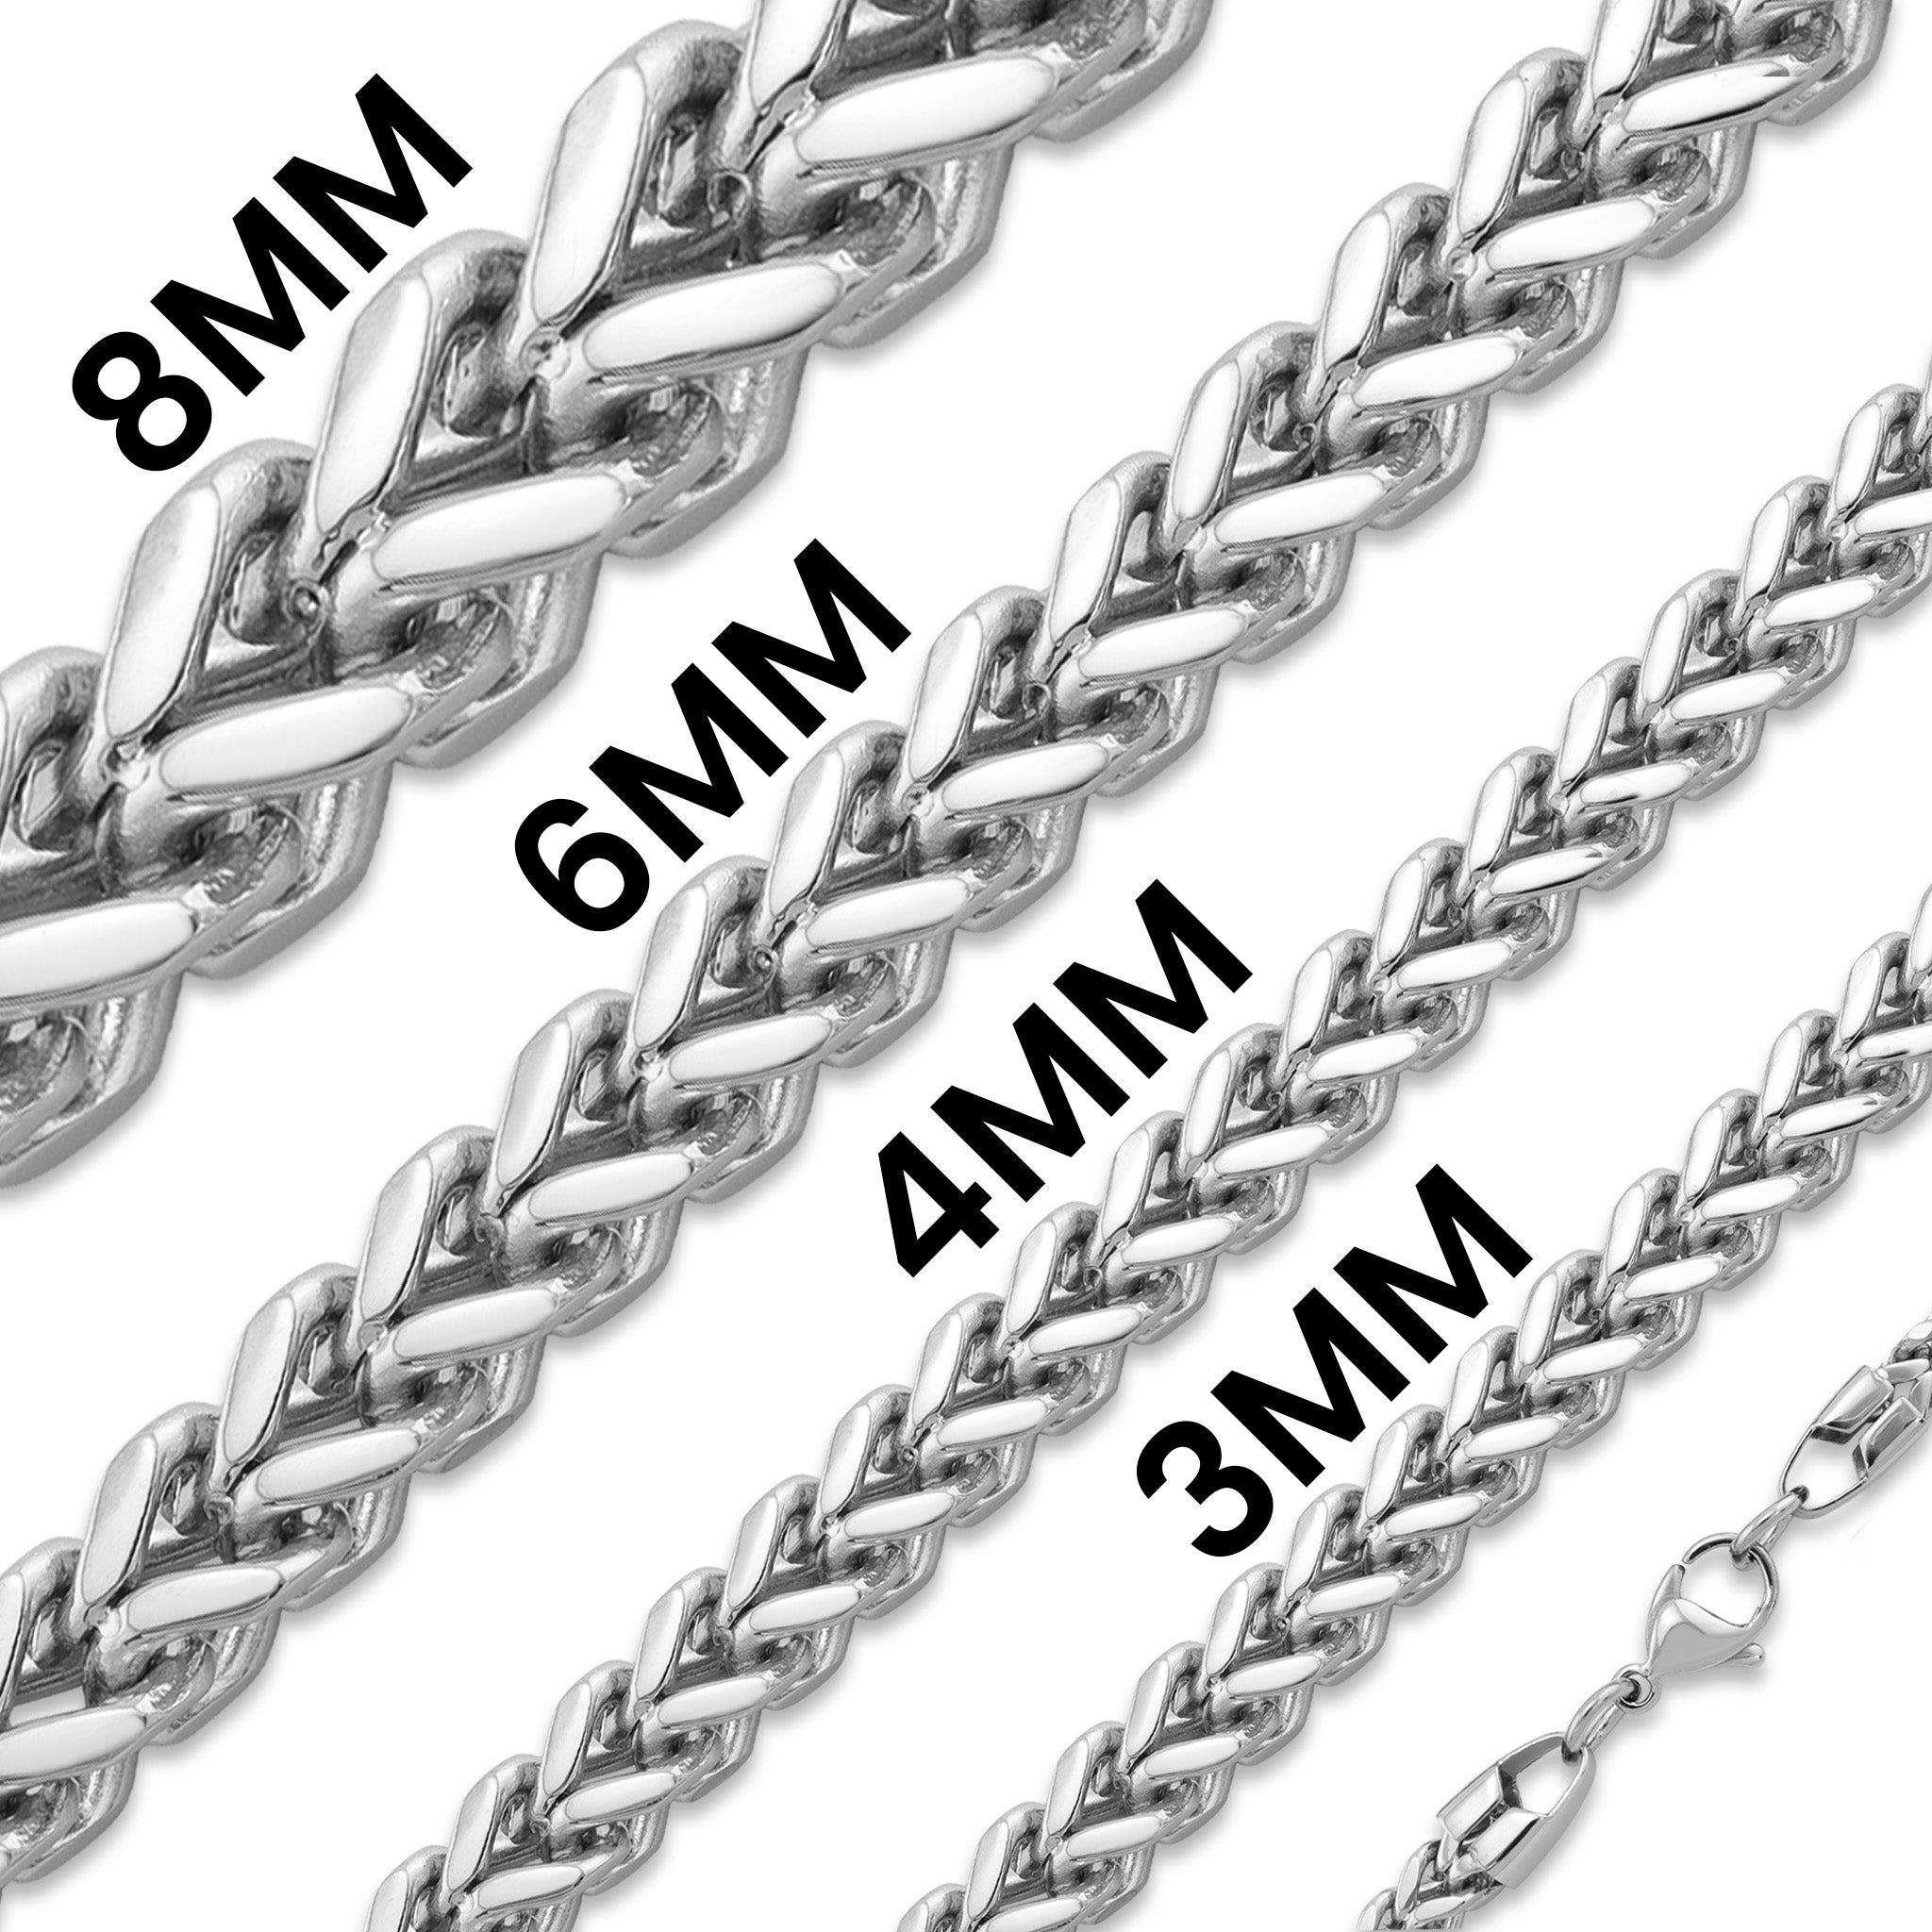 Stainless Steel Chains Wholesale 2/3/4/5mm Width Stainless Steel Round Box  Chain Necklace For Men Women - Buy Stainless Steel Chains Wholesale  2/3/4/5mm Width Stainless Steel Round Box Chain Necklace For Men Women